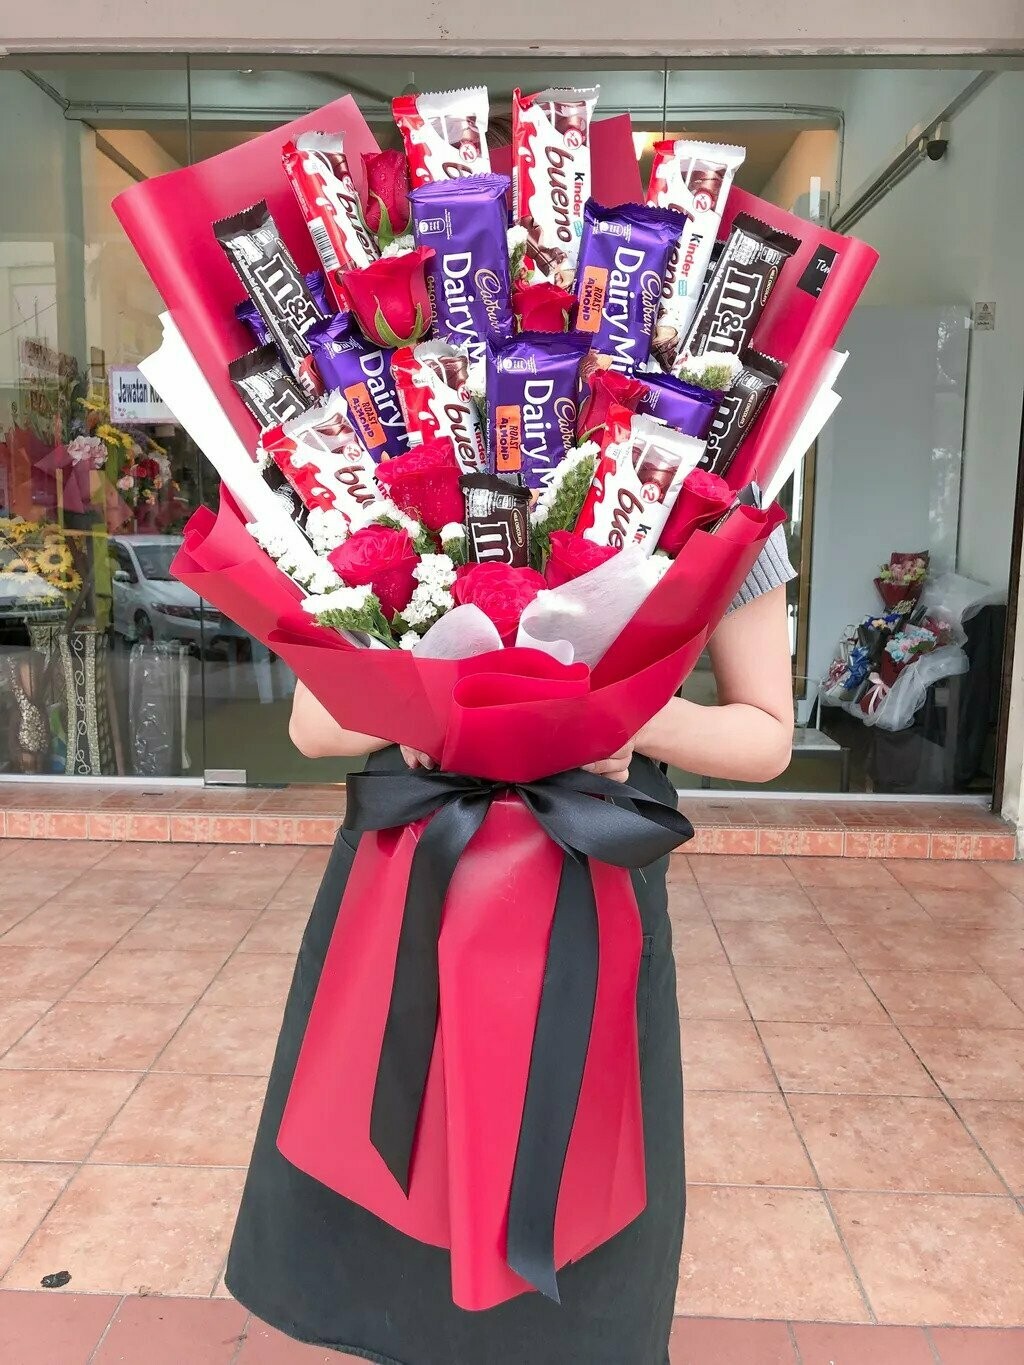 Madly Chocolate (By: Temptation Florist from Seremban)